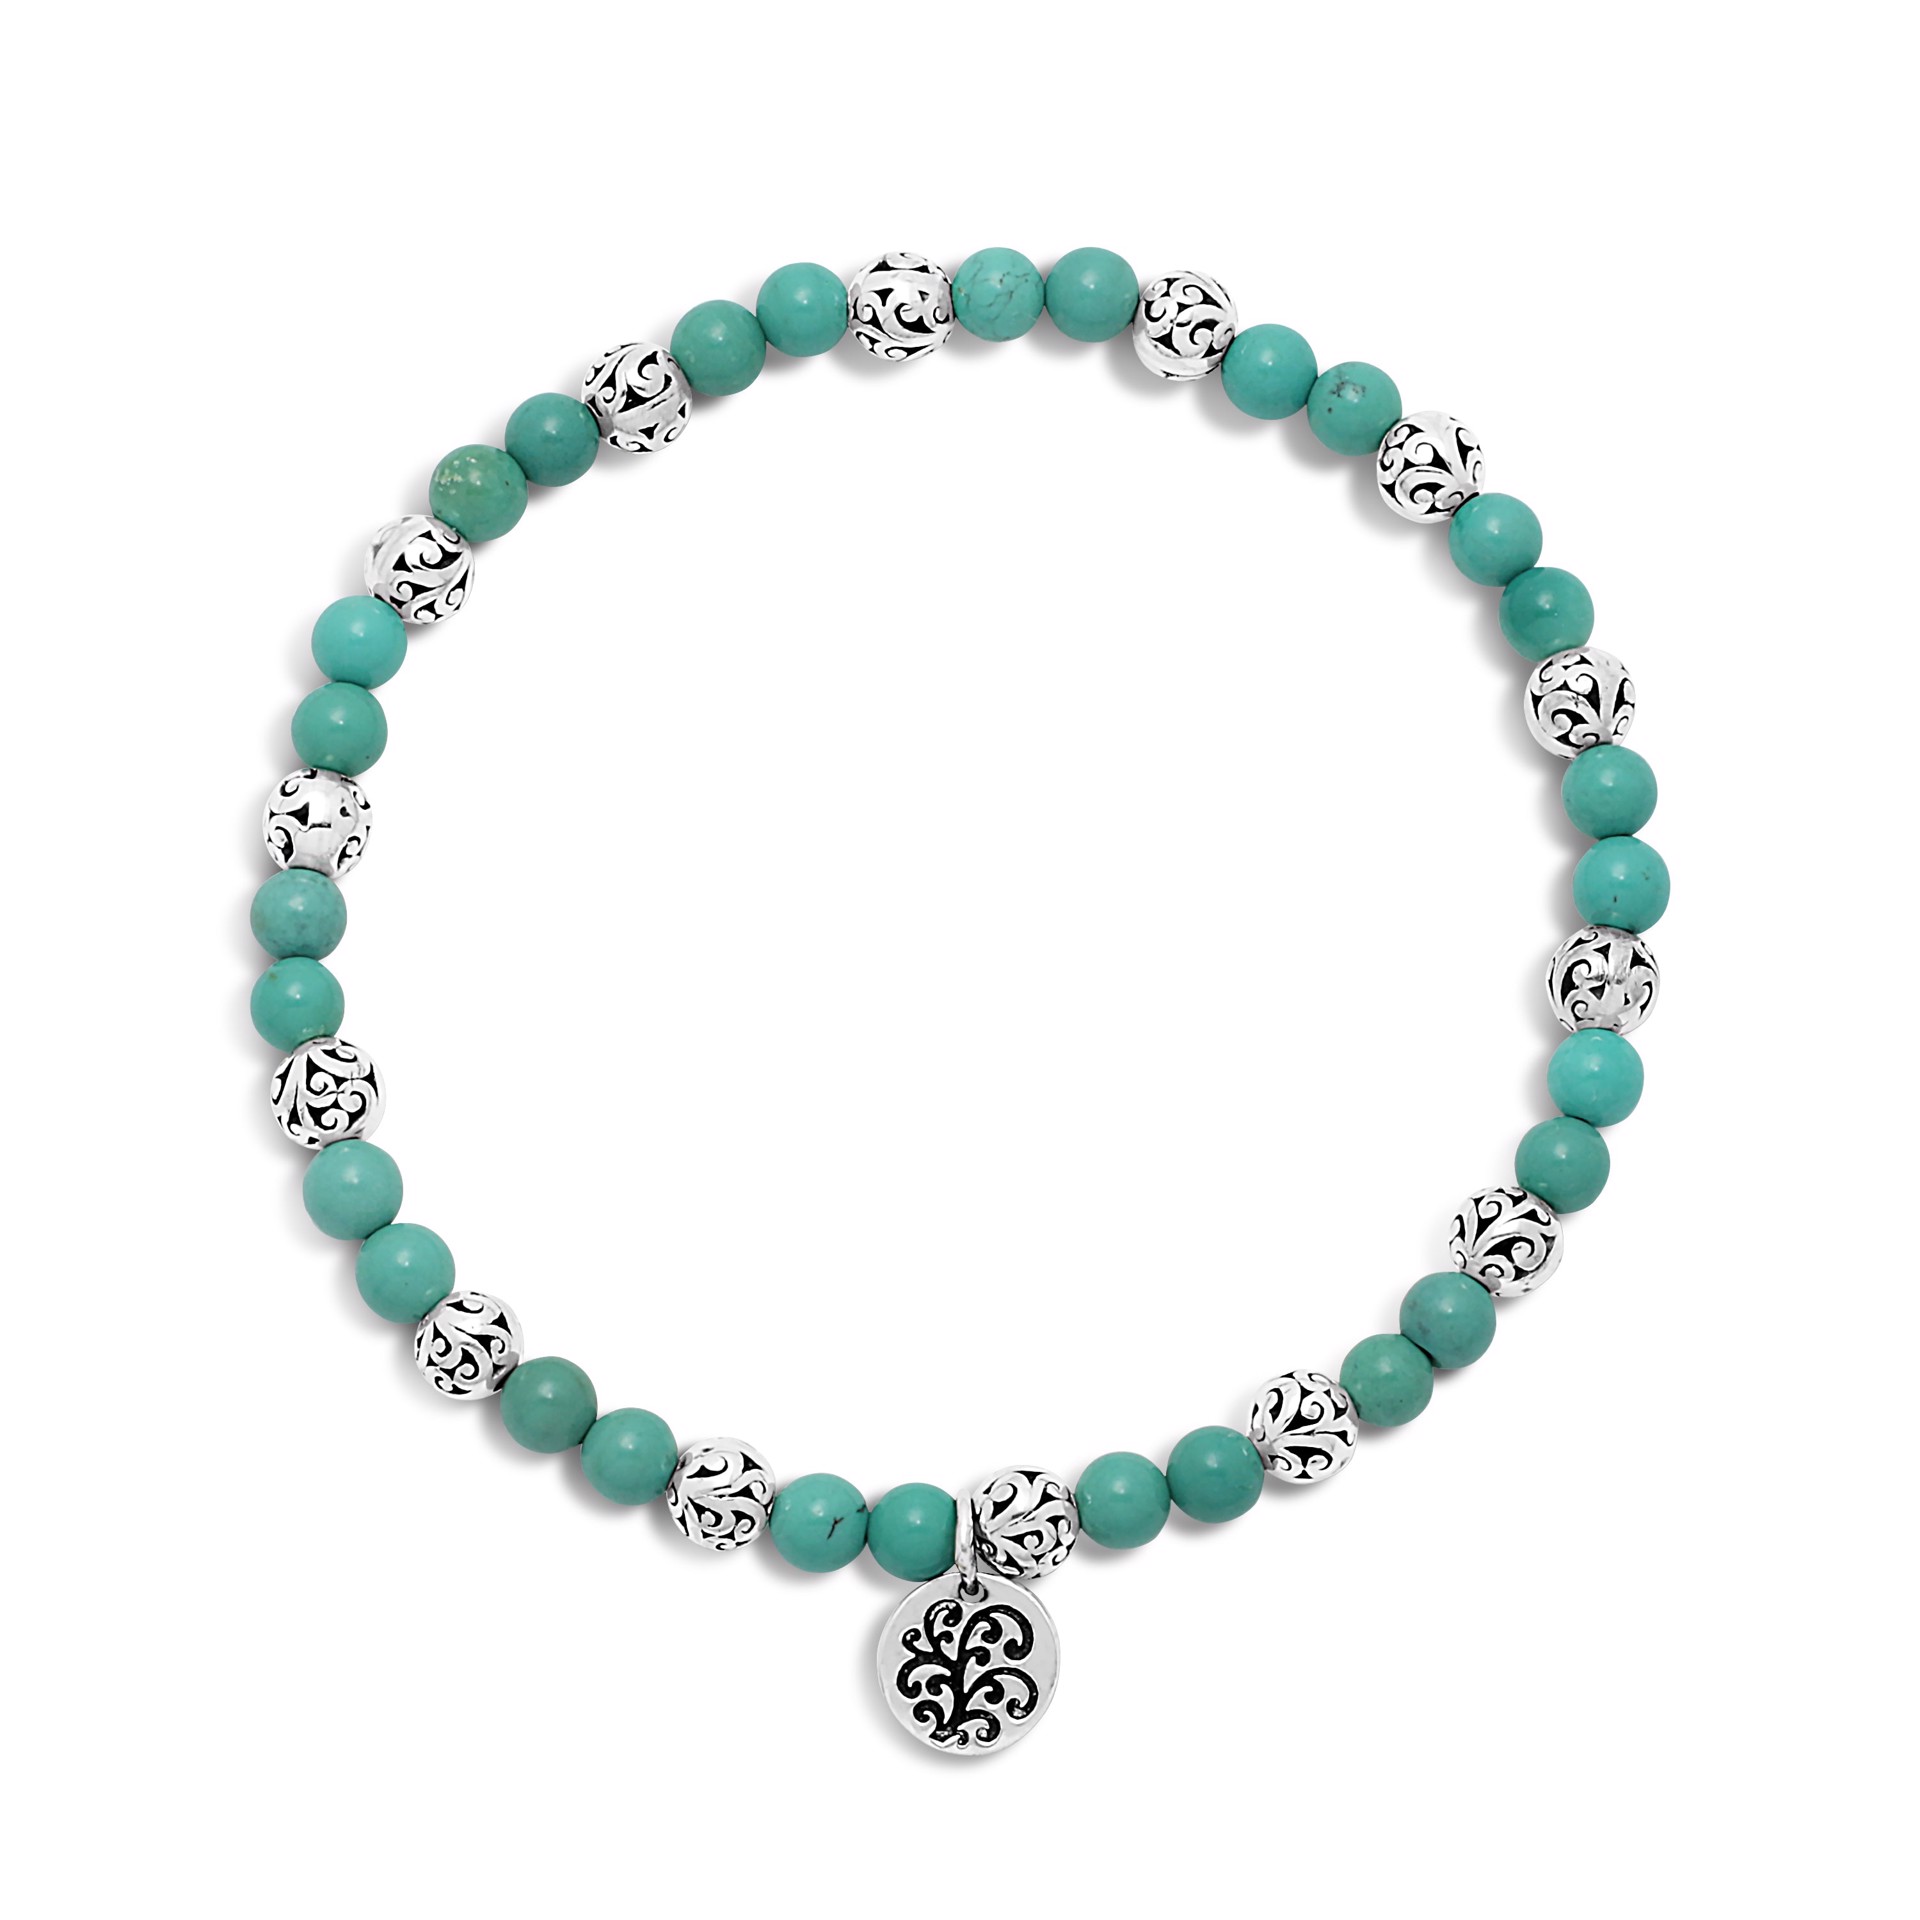 9651 Blue Green Turquoise Bead (4mm) with Scroll Sterling Silver Bead Stretch Bracelet by Lois Hill